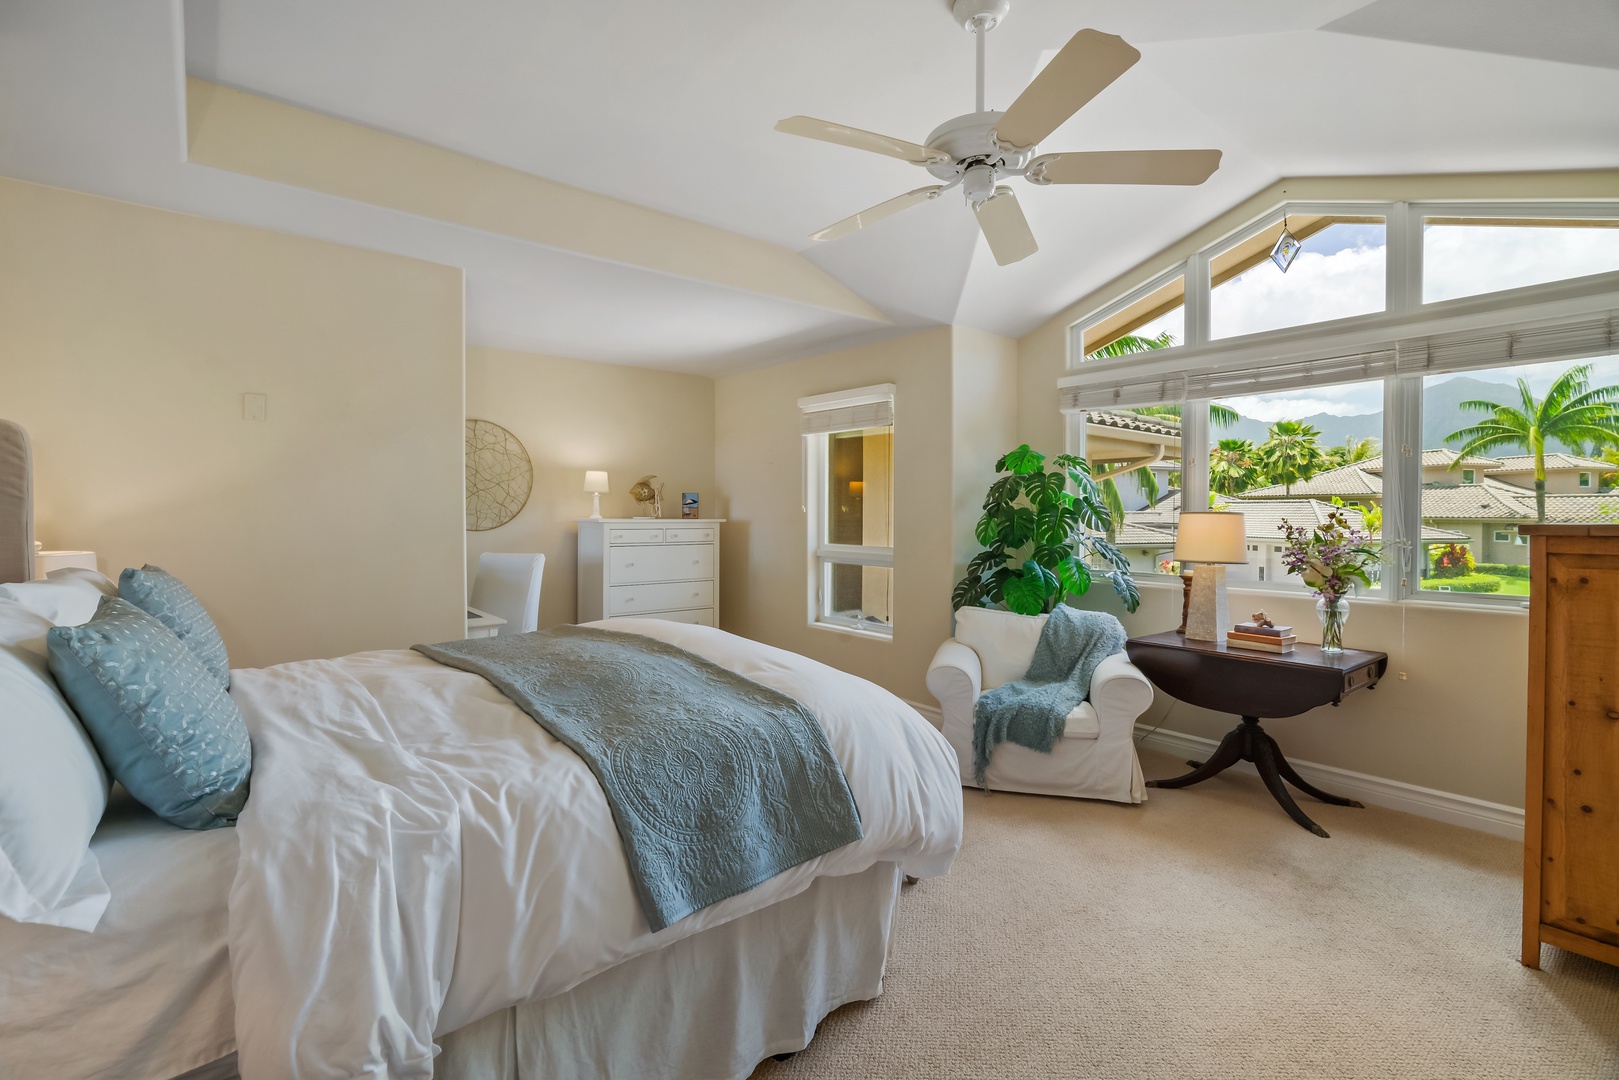 Princeville Vacation Rentals, Noelani Kai - Plush  primary bed with a reading nook, immersed in warm lights as the sun shines through the large window pane.